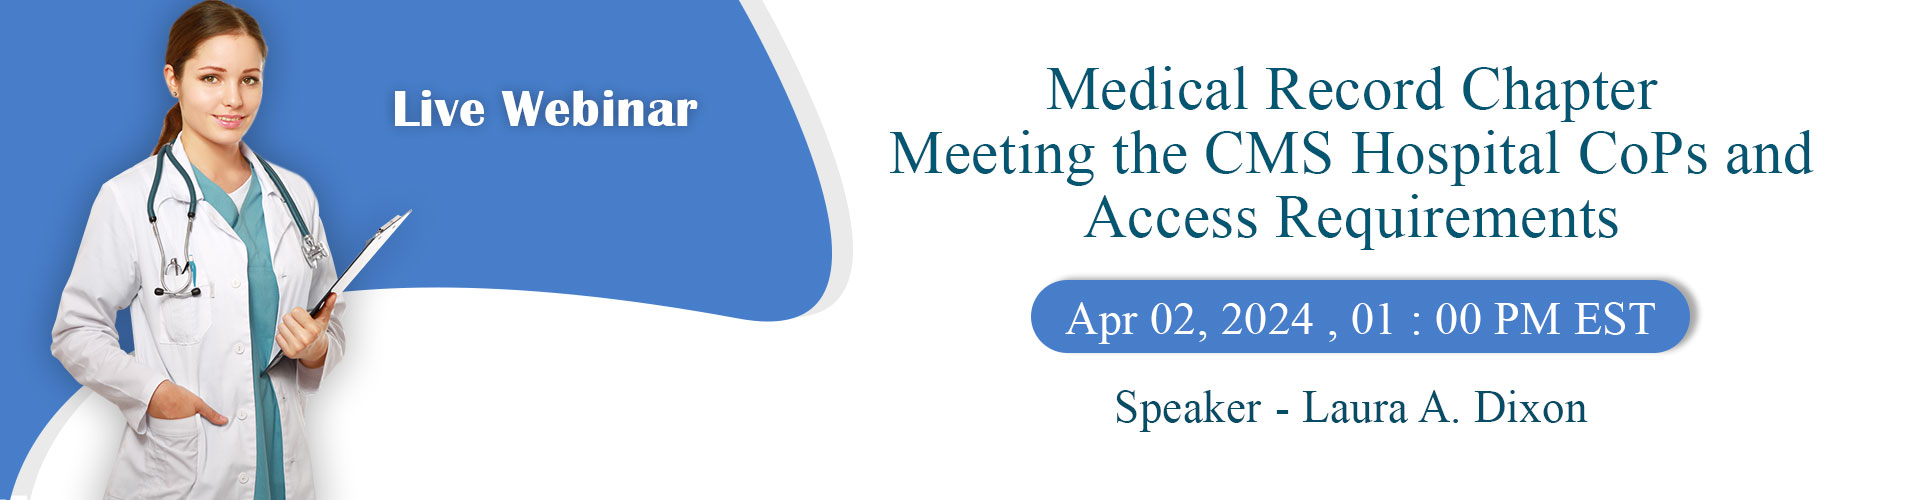 https://conferencepanel.com/conference/medical-record-chapter-meeting-the-cms-hospital-cops-and-access-requirements